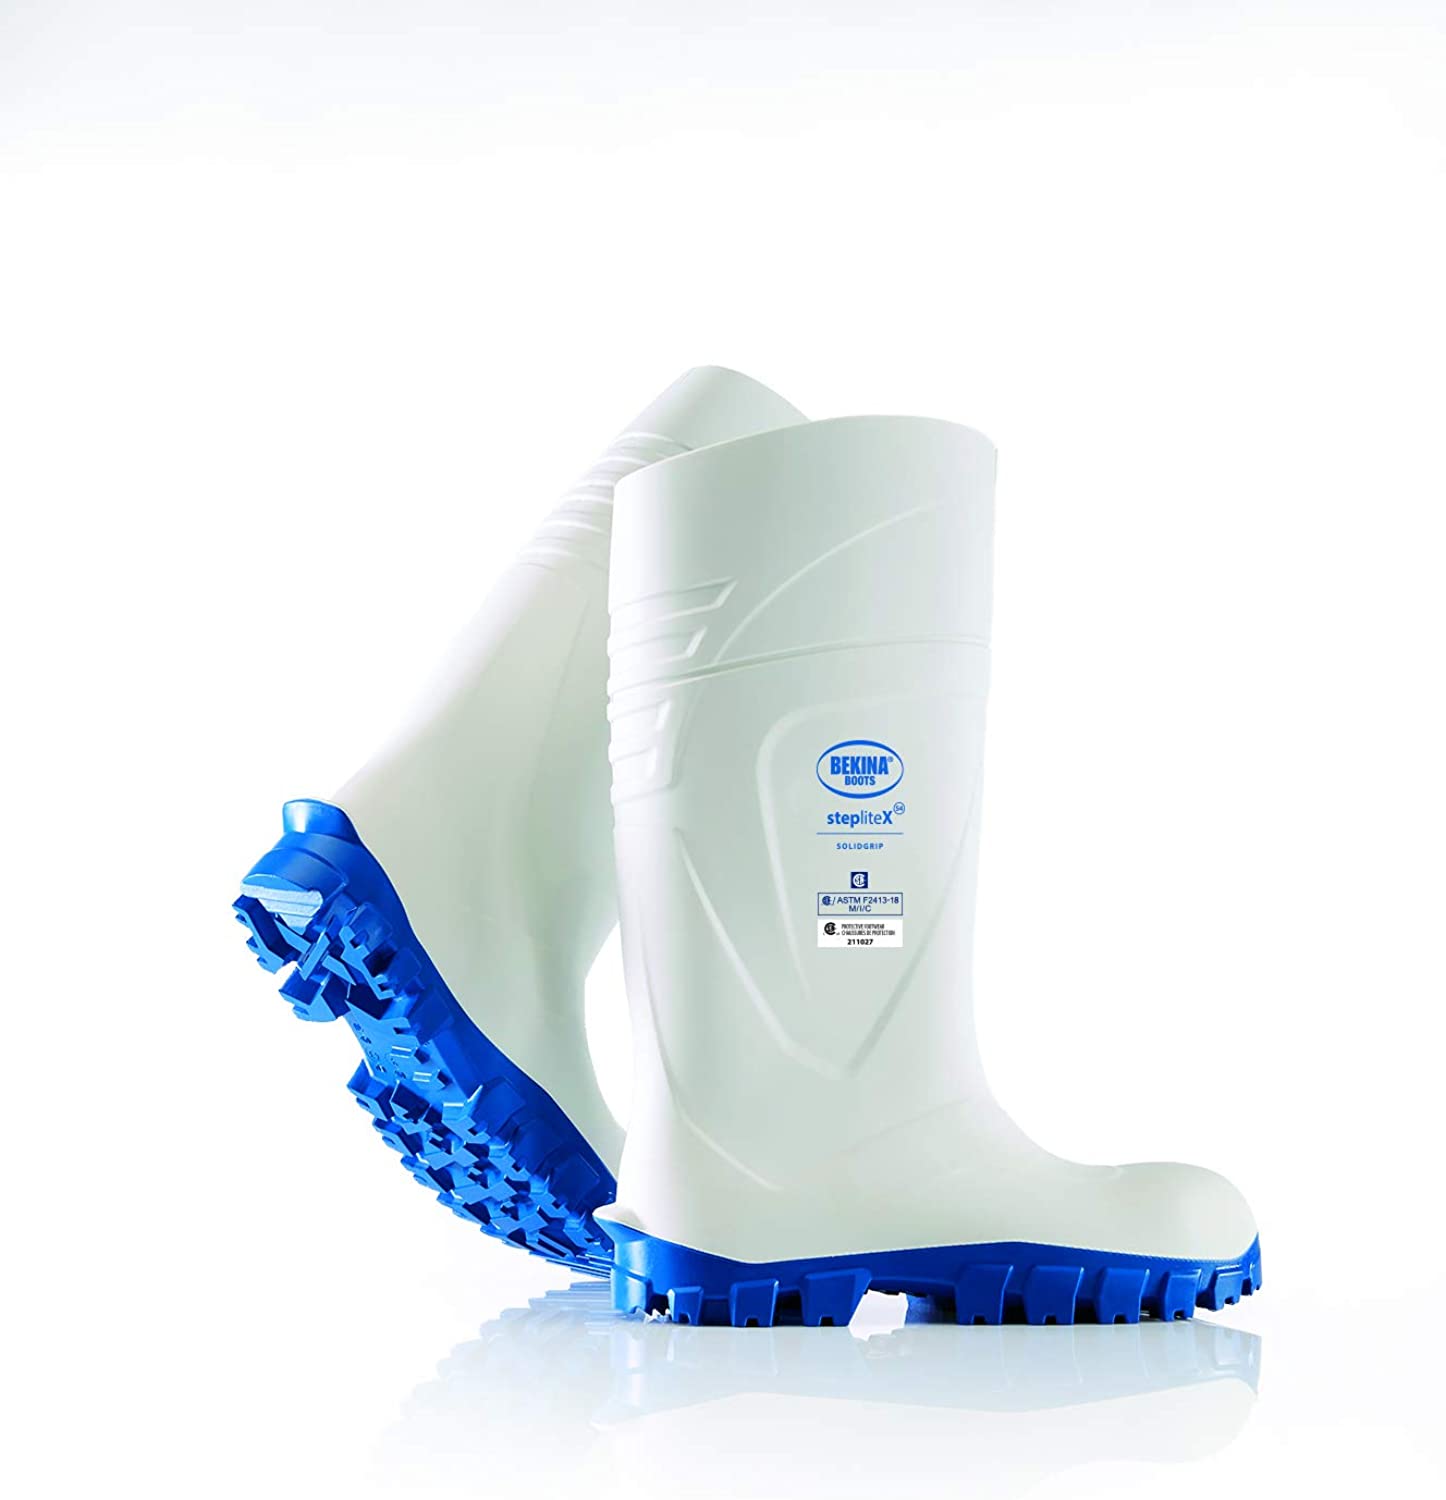 Steplitex Solidgrip S4 Metal Safety Toe Cap Work Boots in White/Blue from the side view